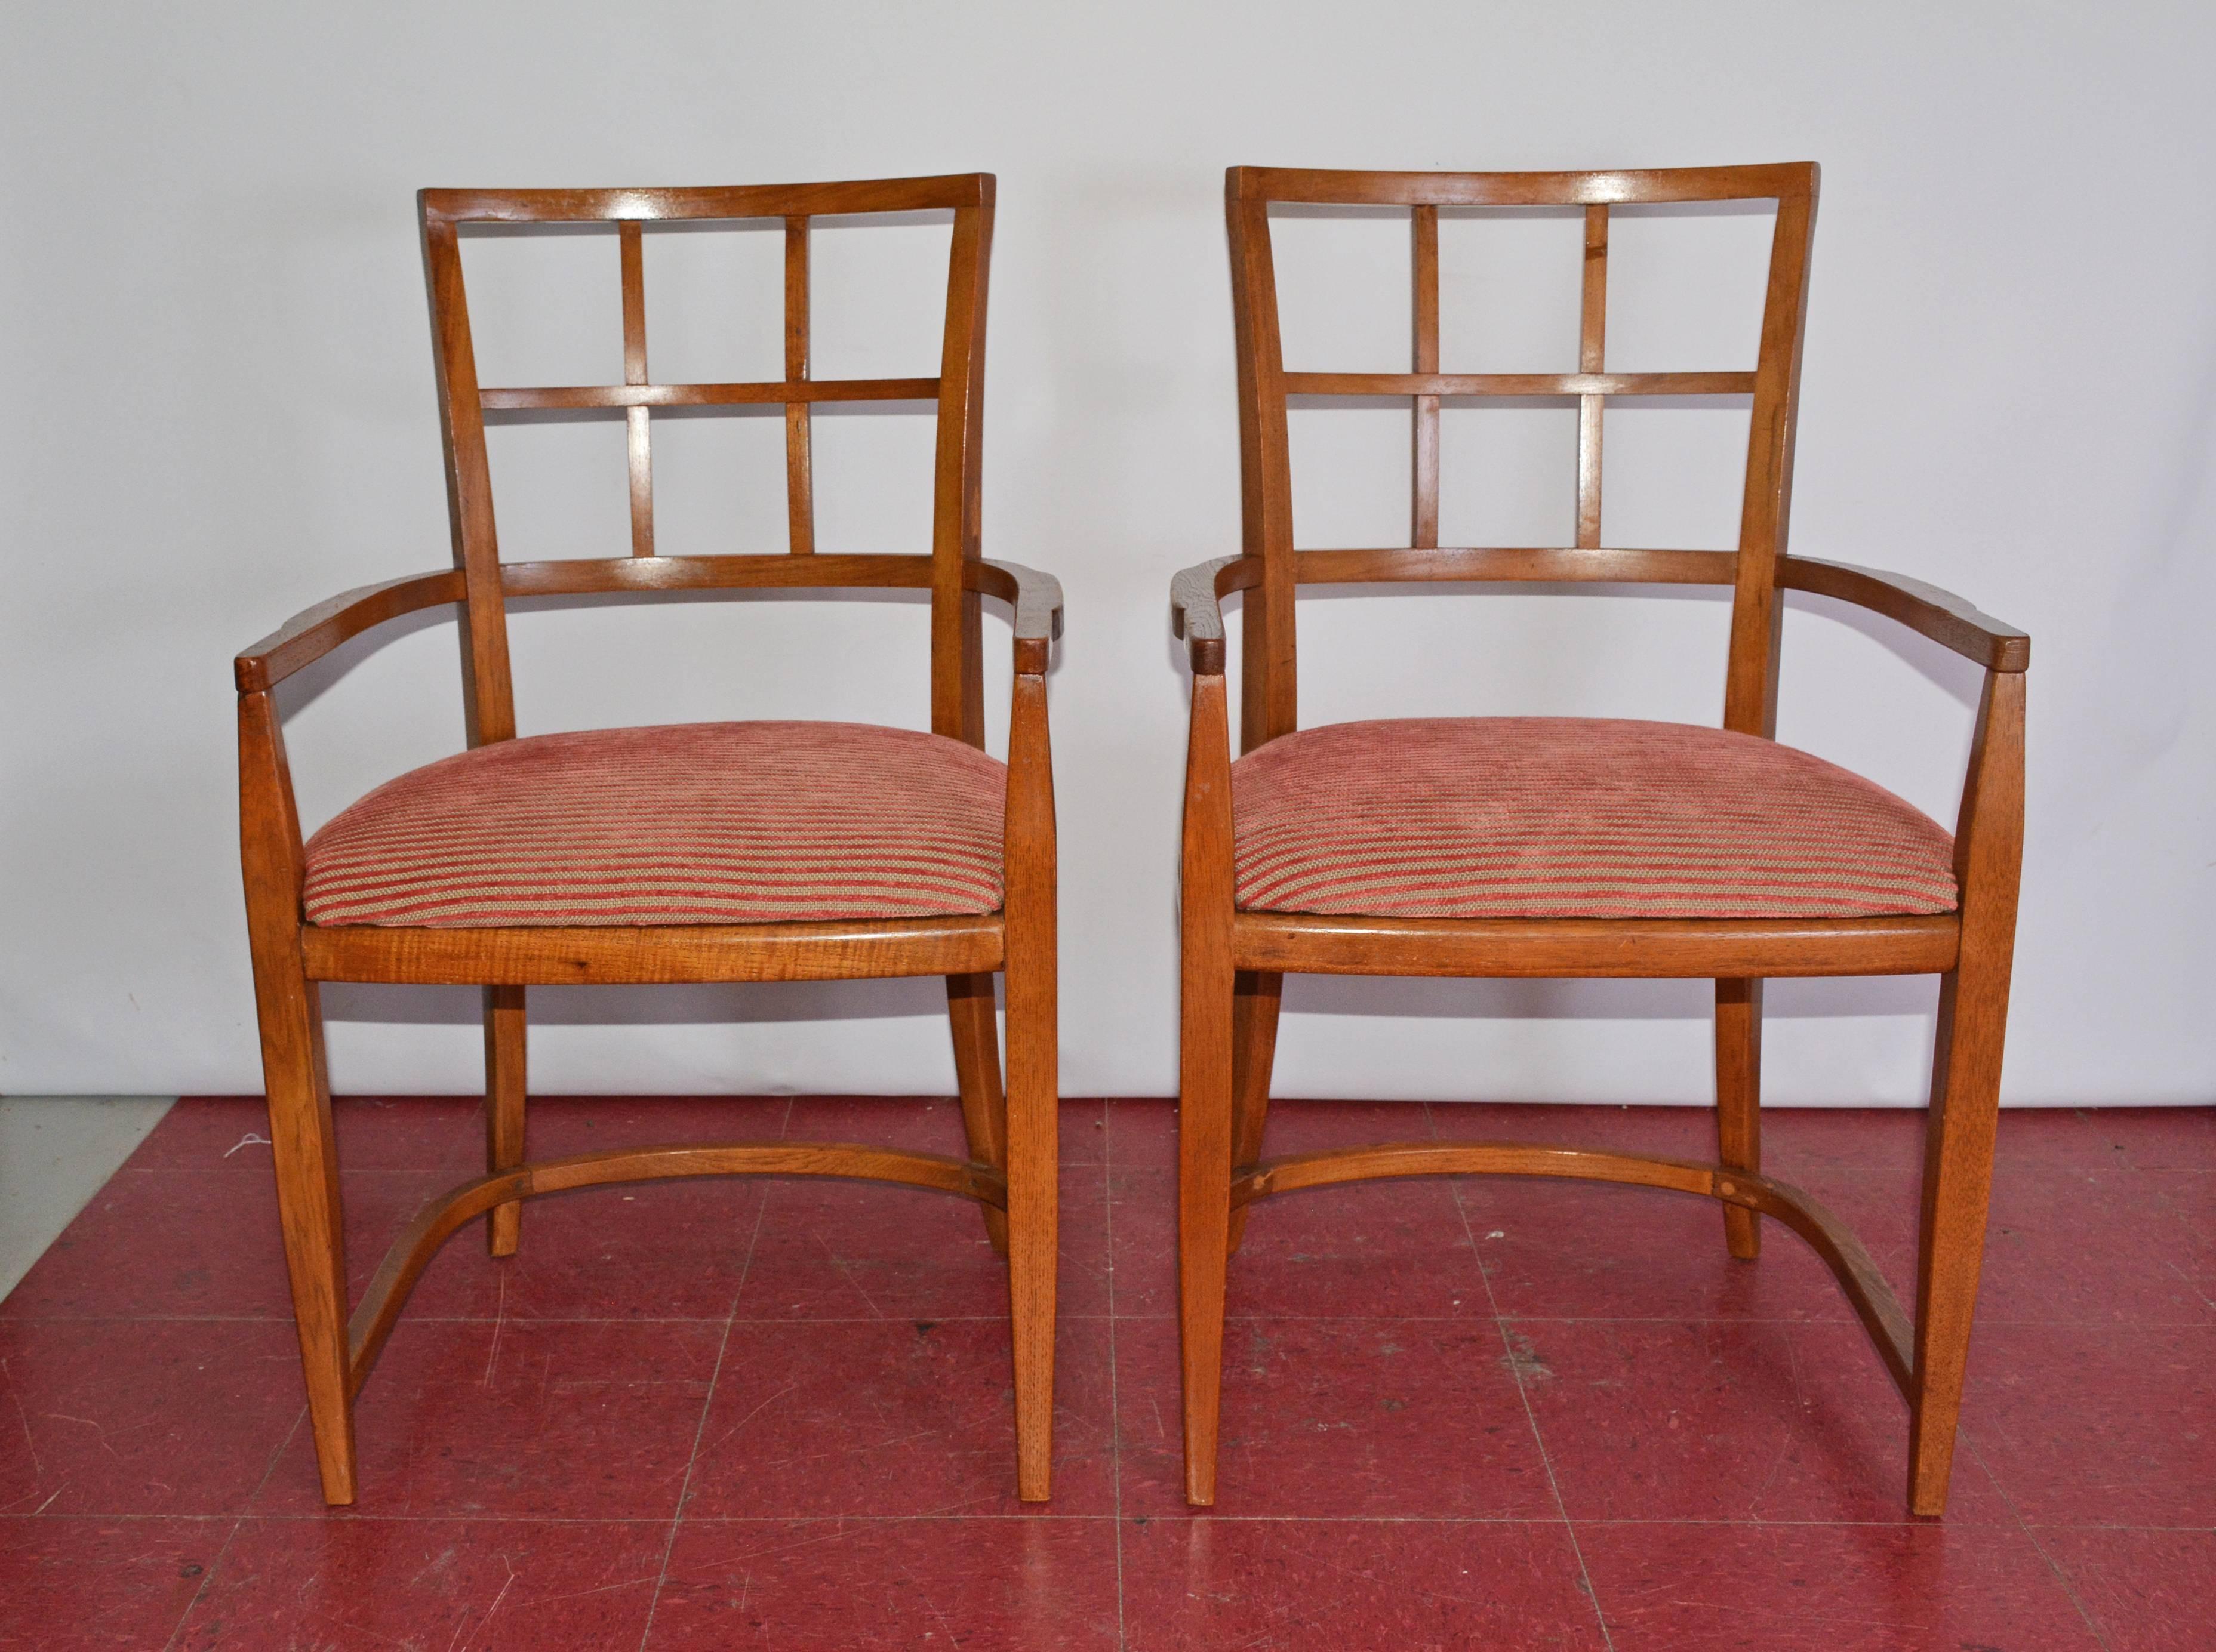 The pair of Art Deco/Mid-Century Modern dining arm chairs have rounded leg framing and backs. The seats are newly upholstered in ribbed red and tan striping. Also be great as office chairs, desk chairs, waiting room chairs or occasional